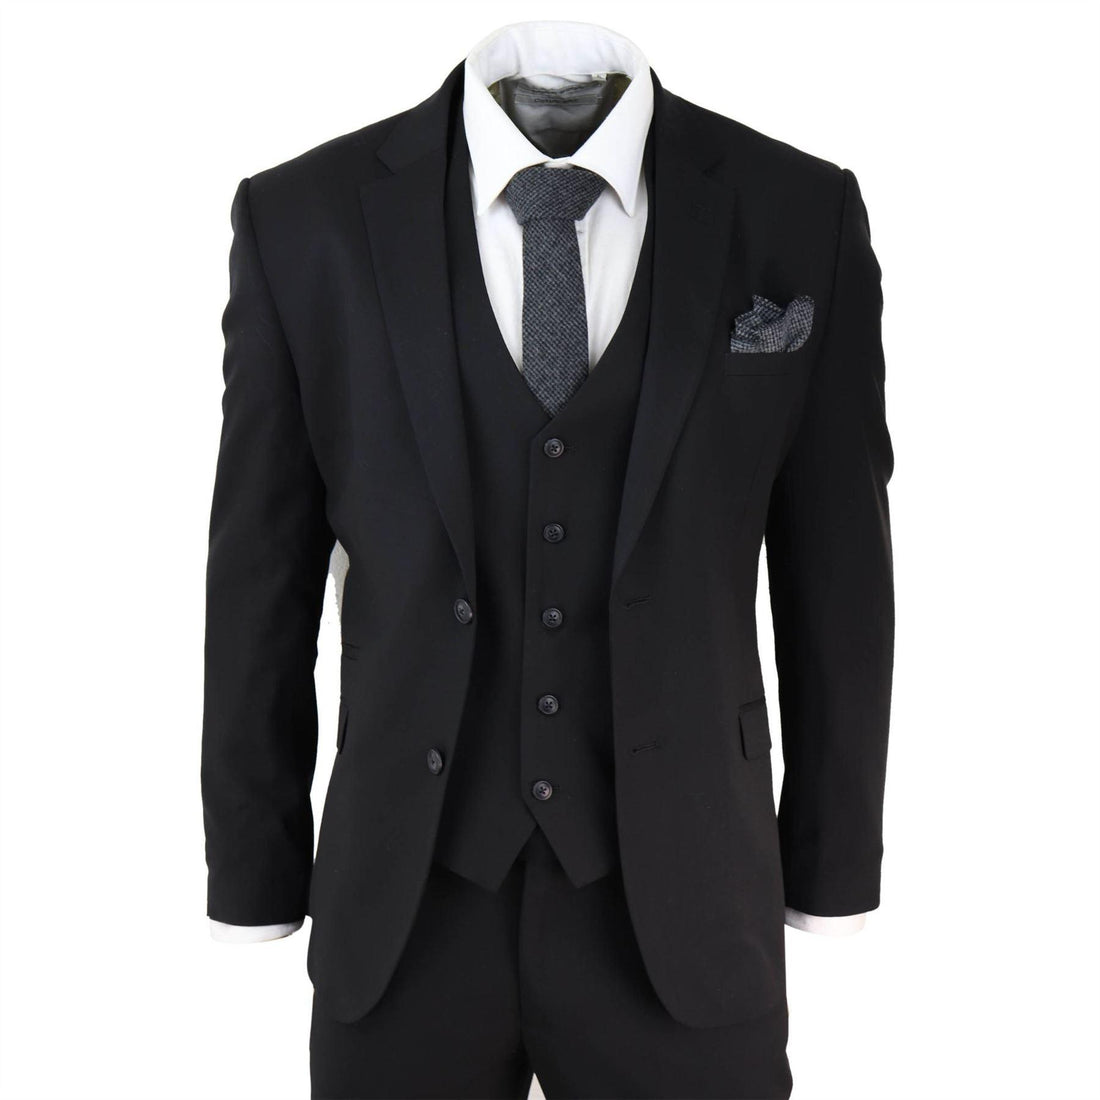 Mens Black 3 Piece Suit Classic Short Regular Long Smart Formal Tailored Fit - Knighthood Store